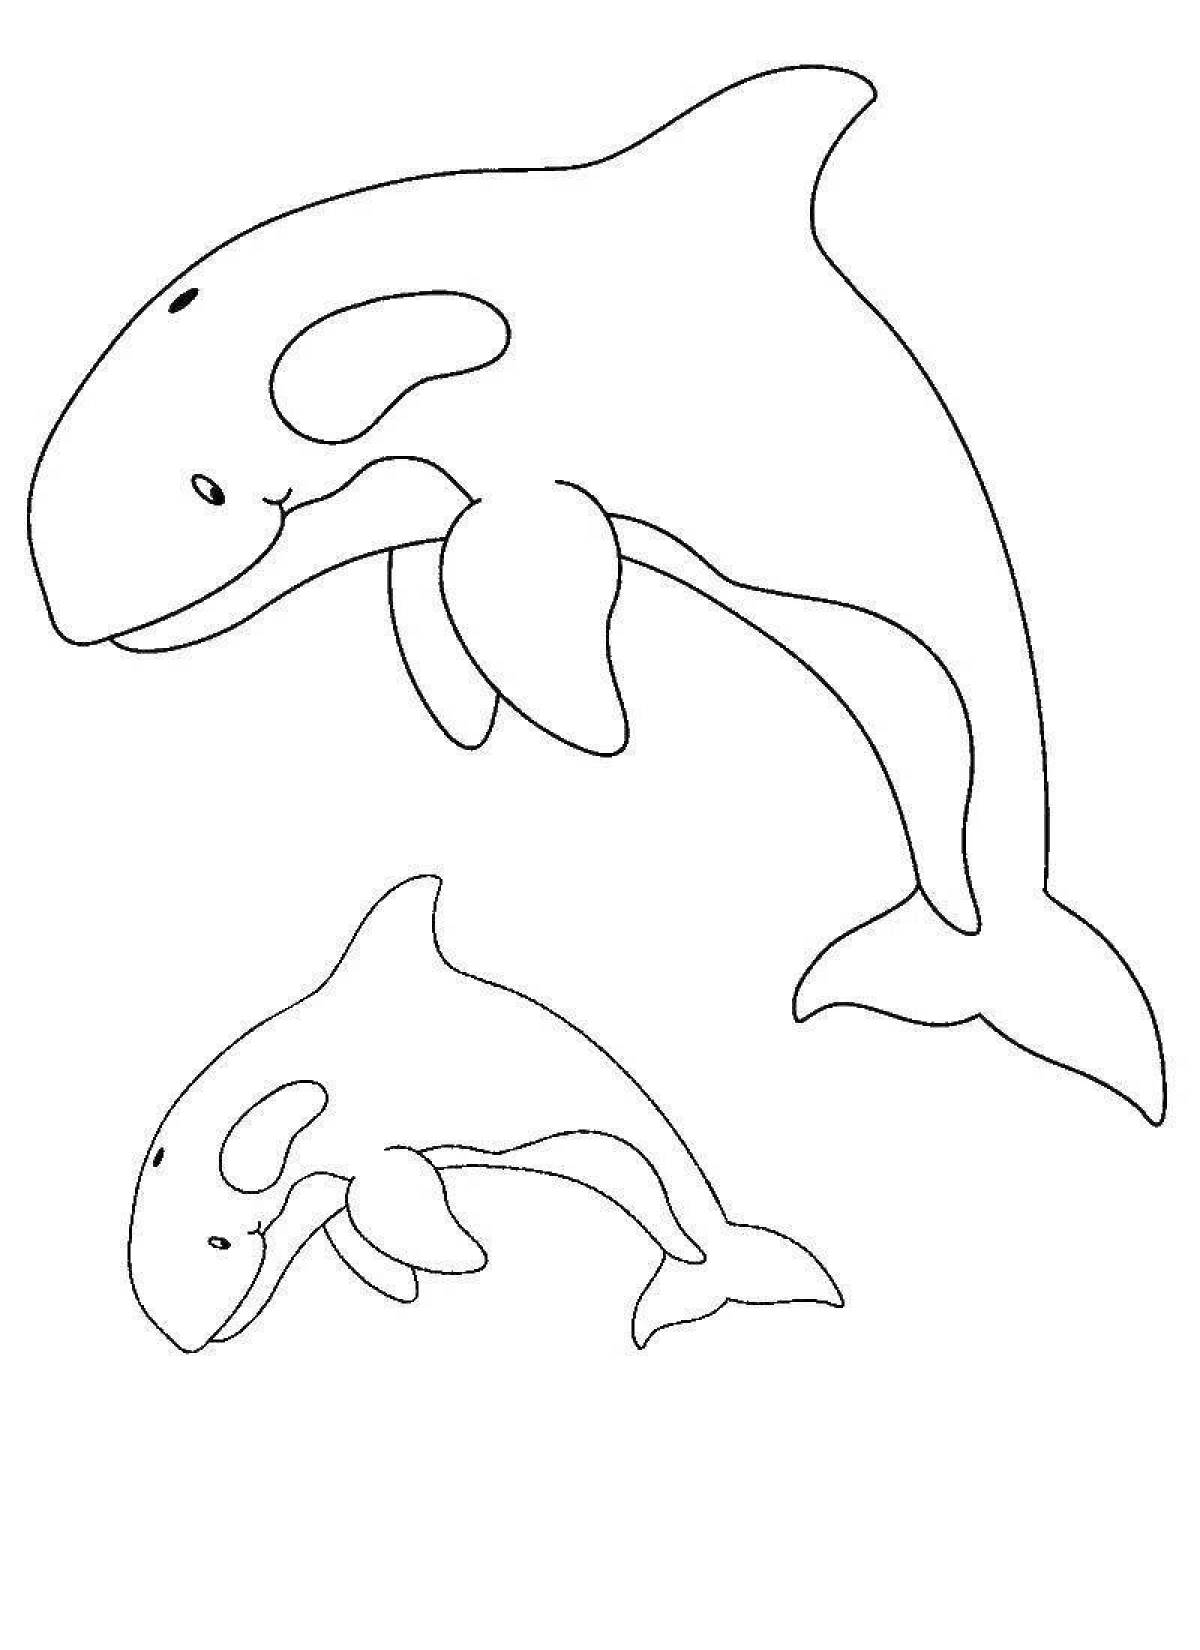 Wonderful killer whale coloring